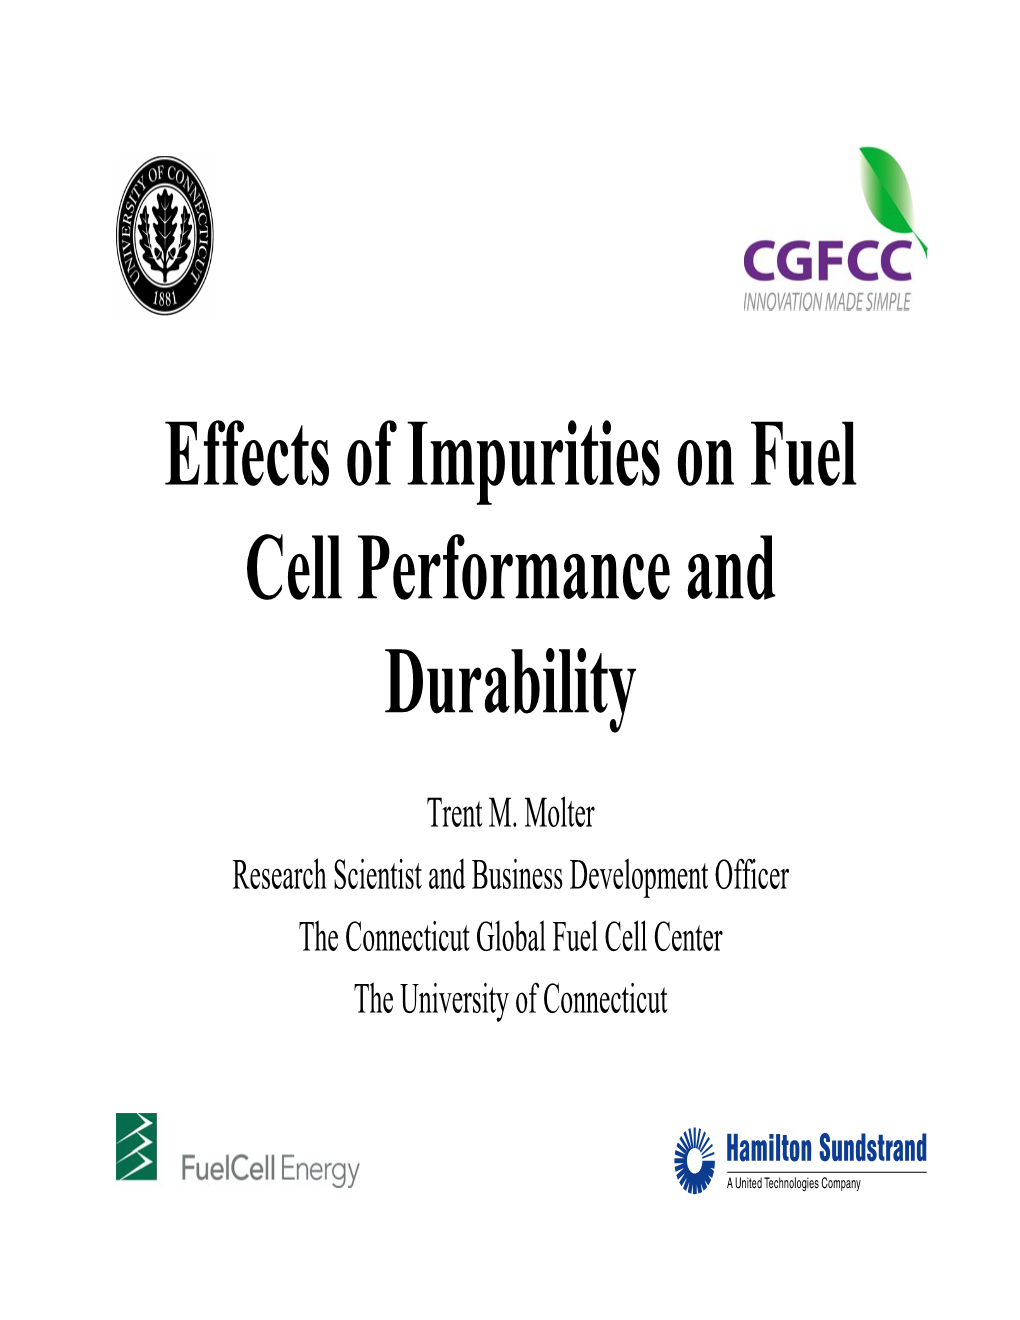 Effects of Impurities of Fuel Cell Performance and Durability